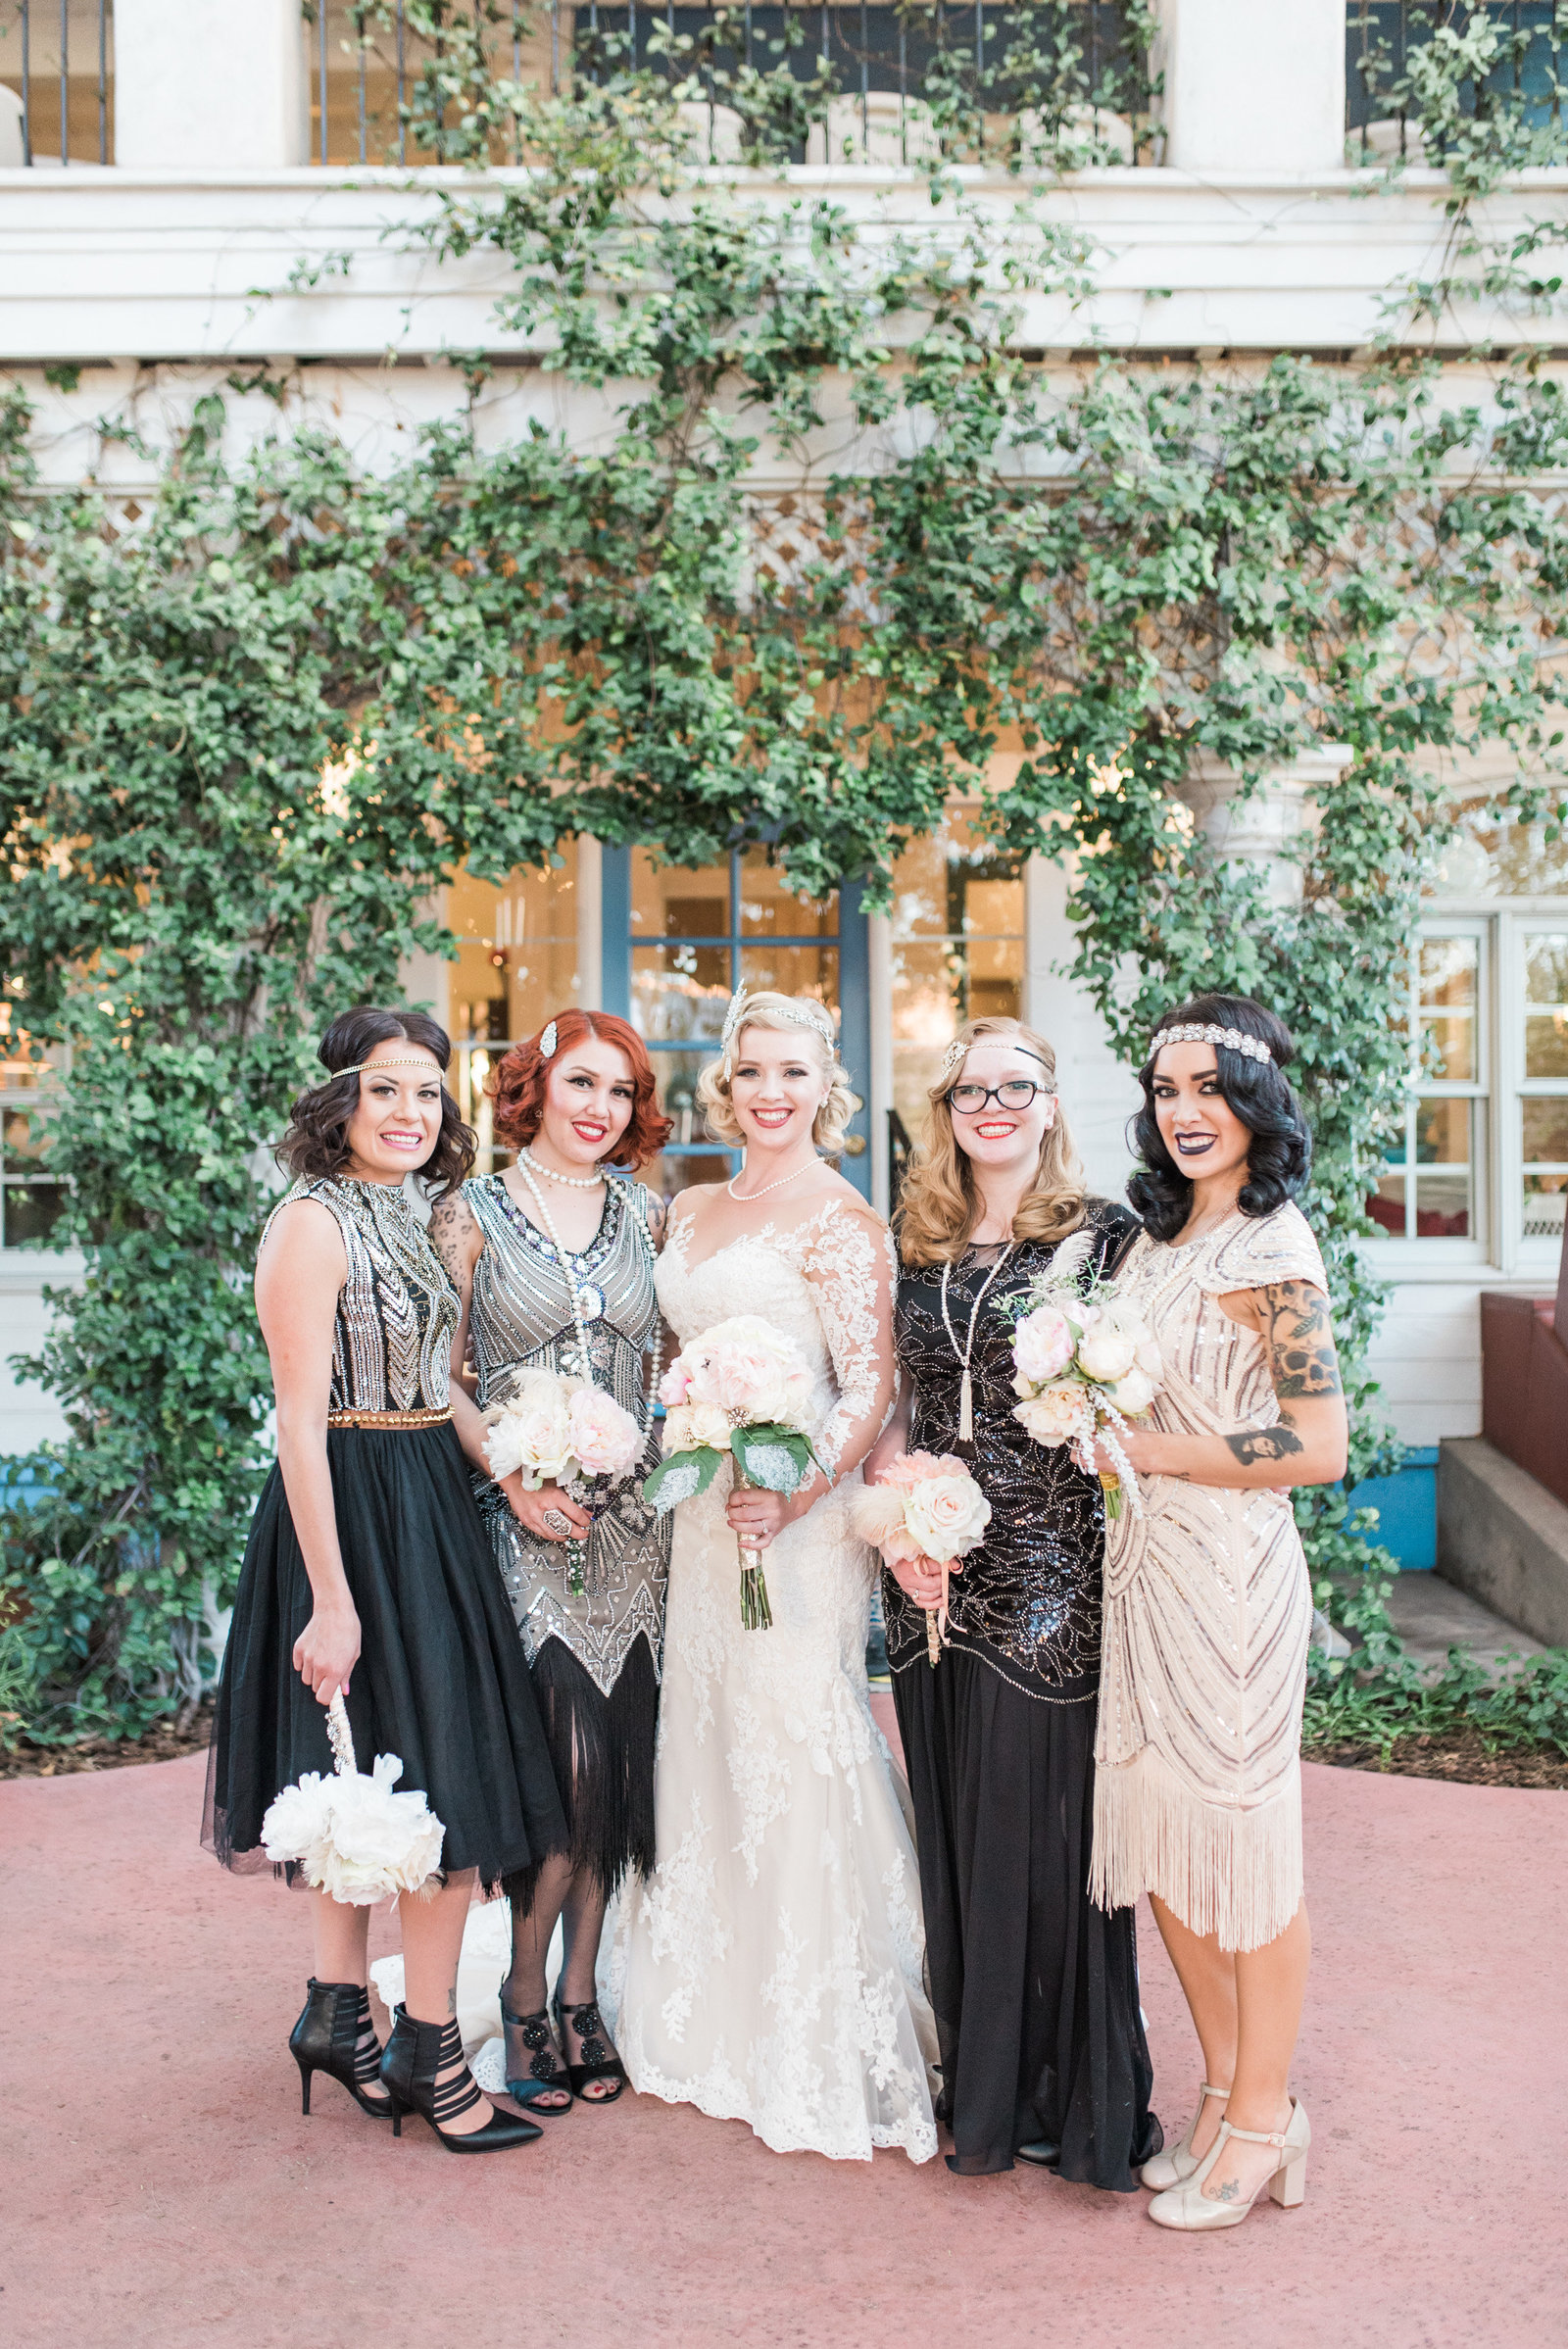 Downtown Tucson Z Mansion Vintage Wedding Photo of Bride and Bridesmaids | Tucson Wedding Photographer | West End Photography